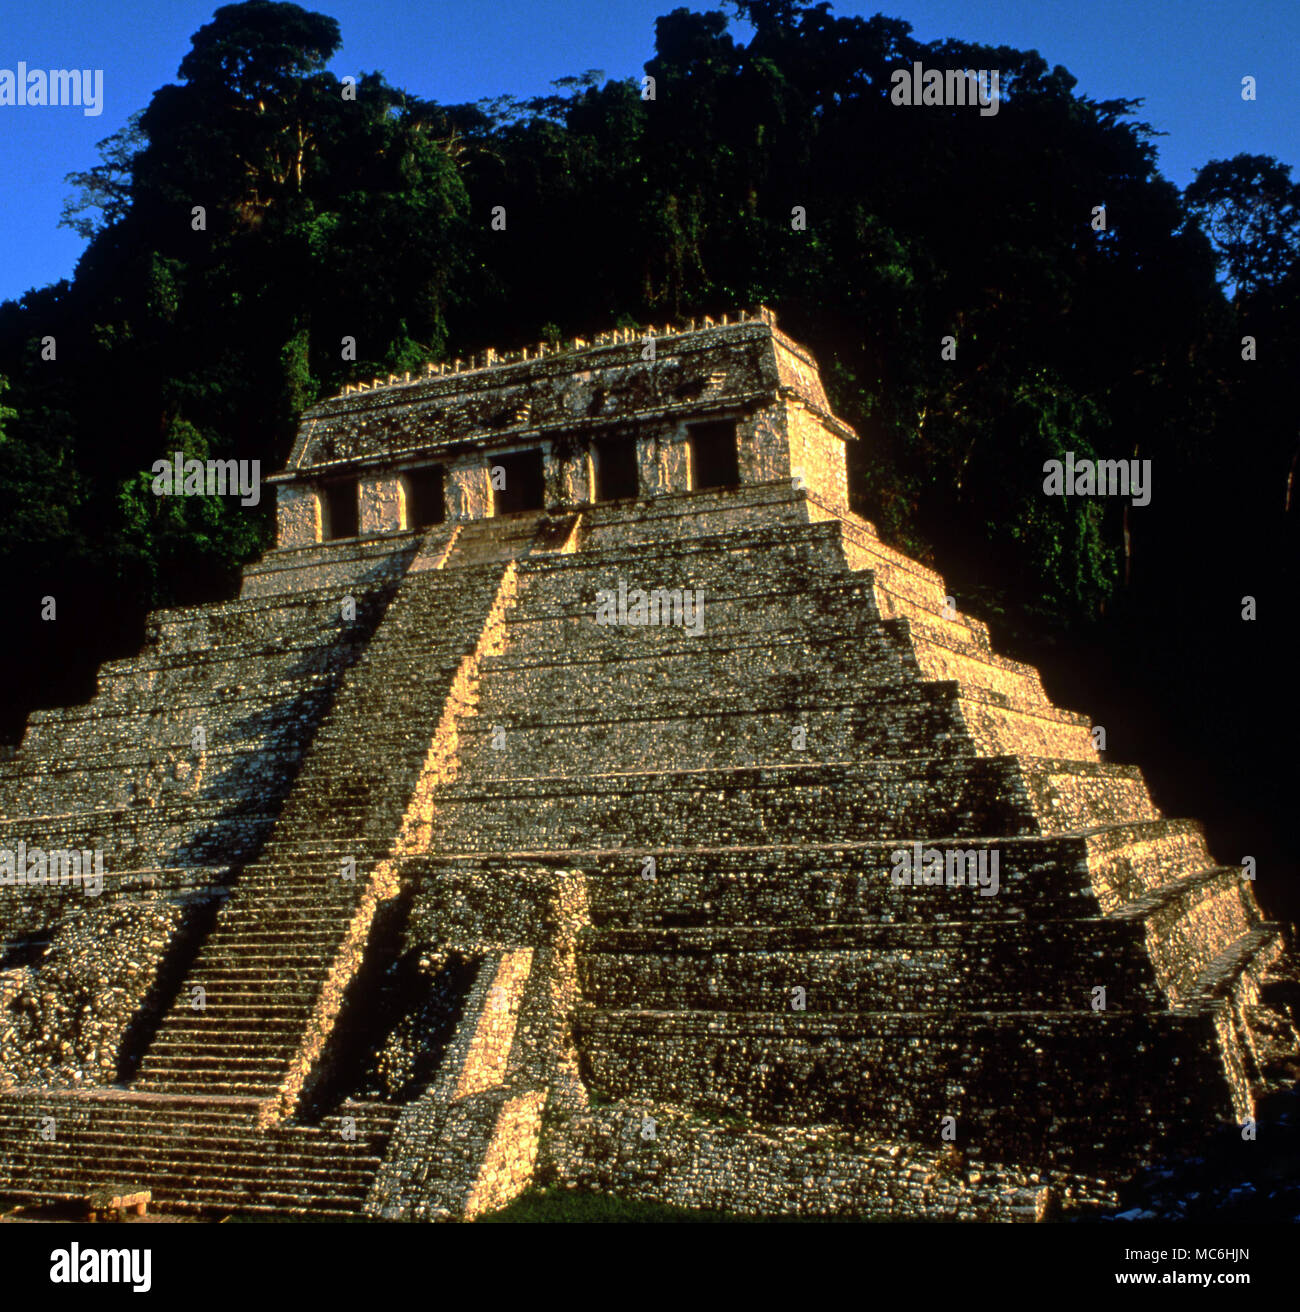 Mexican Archaeology. Palenque Pyramid - temple of the Inscriptions constructed at the end of the 7th century. In 1951 a secret crypt was discovered inside, with six skeletons and a seventh,which was propbably the body of the temple builder. Stock Photo